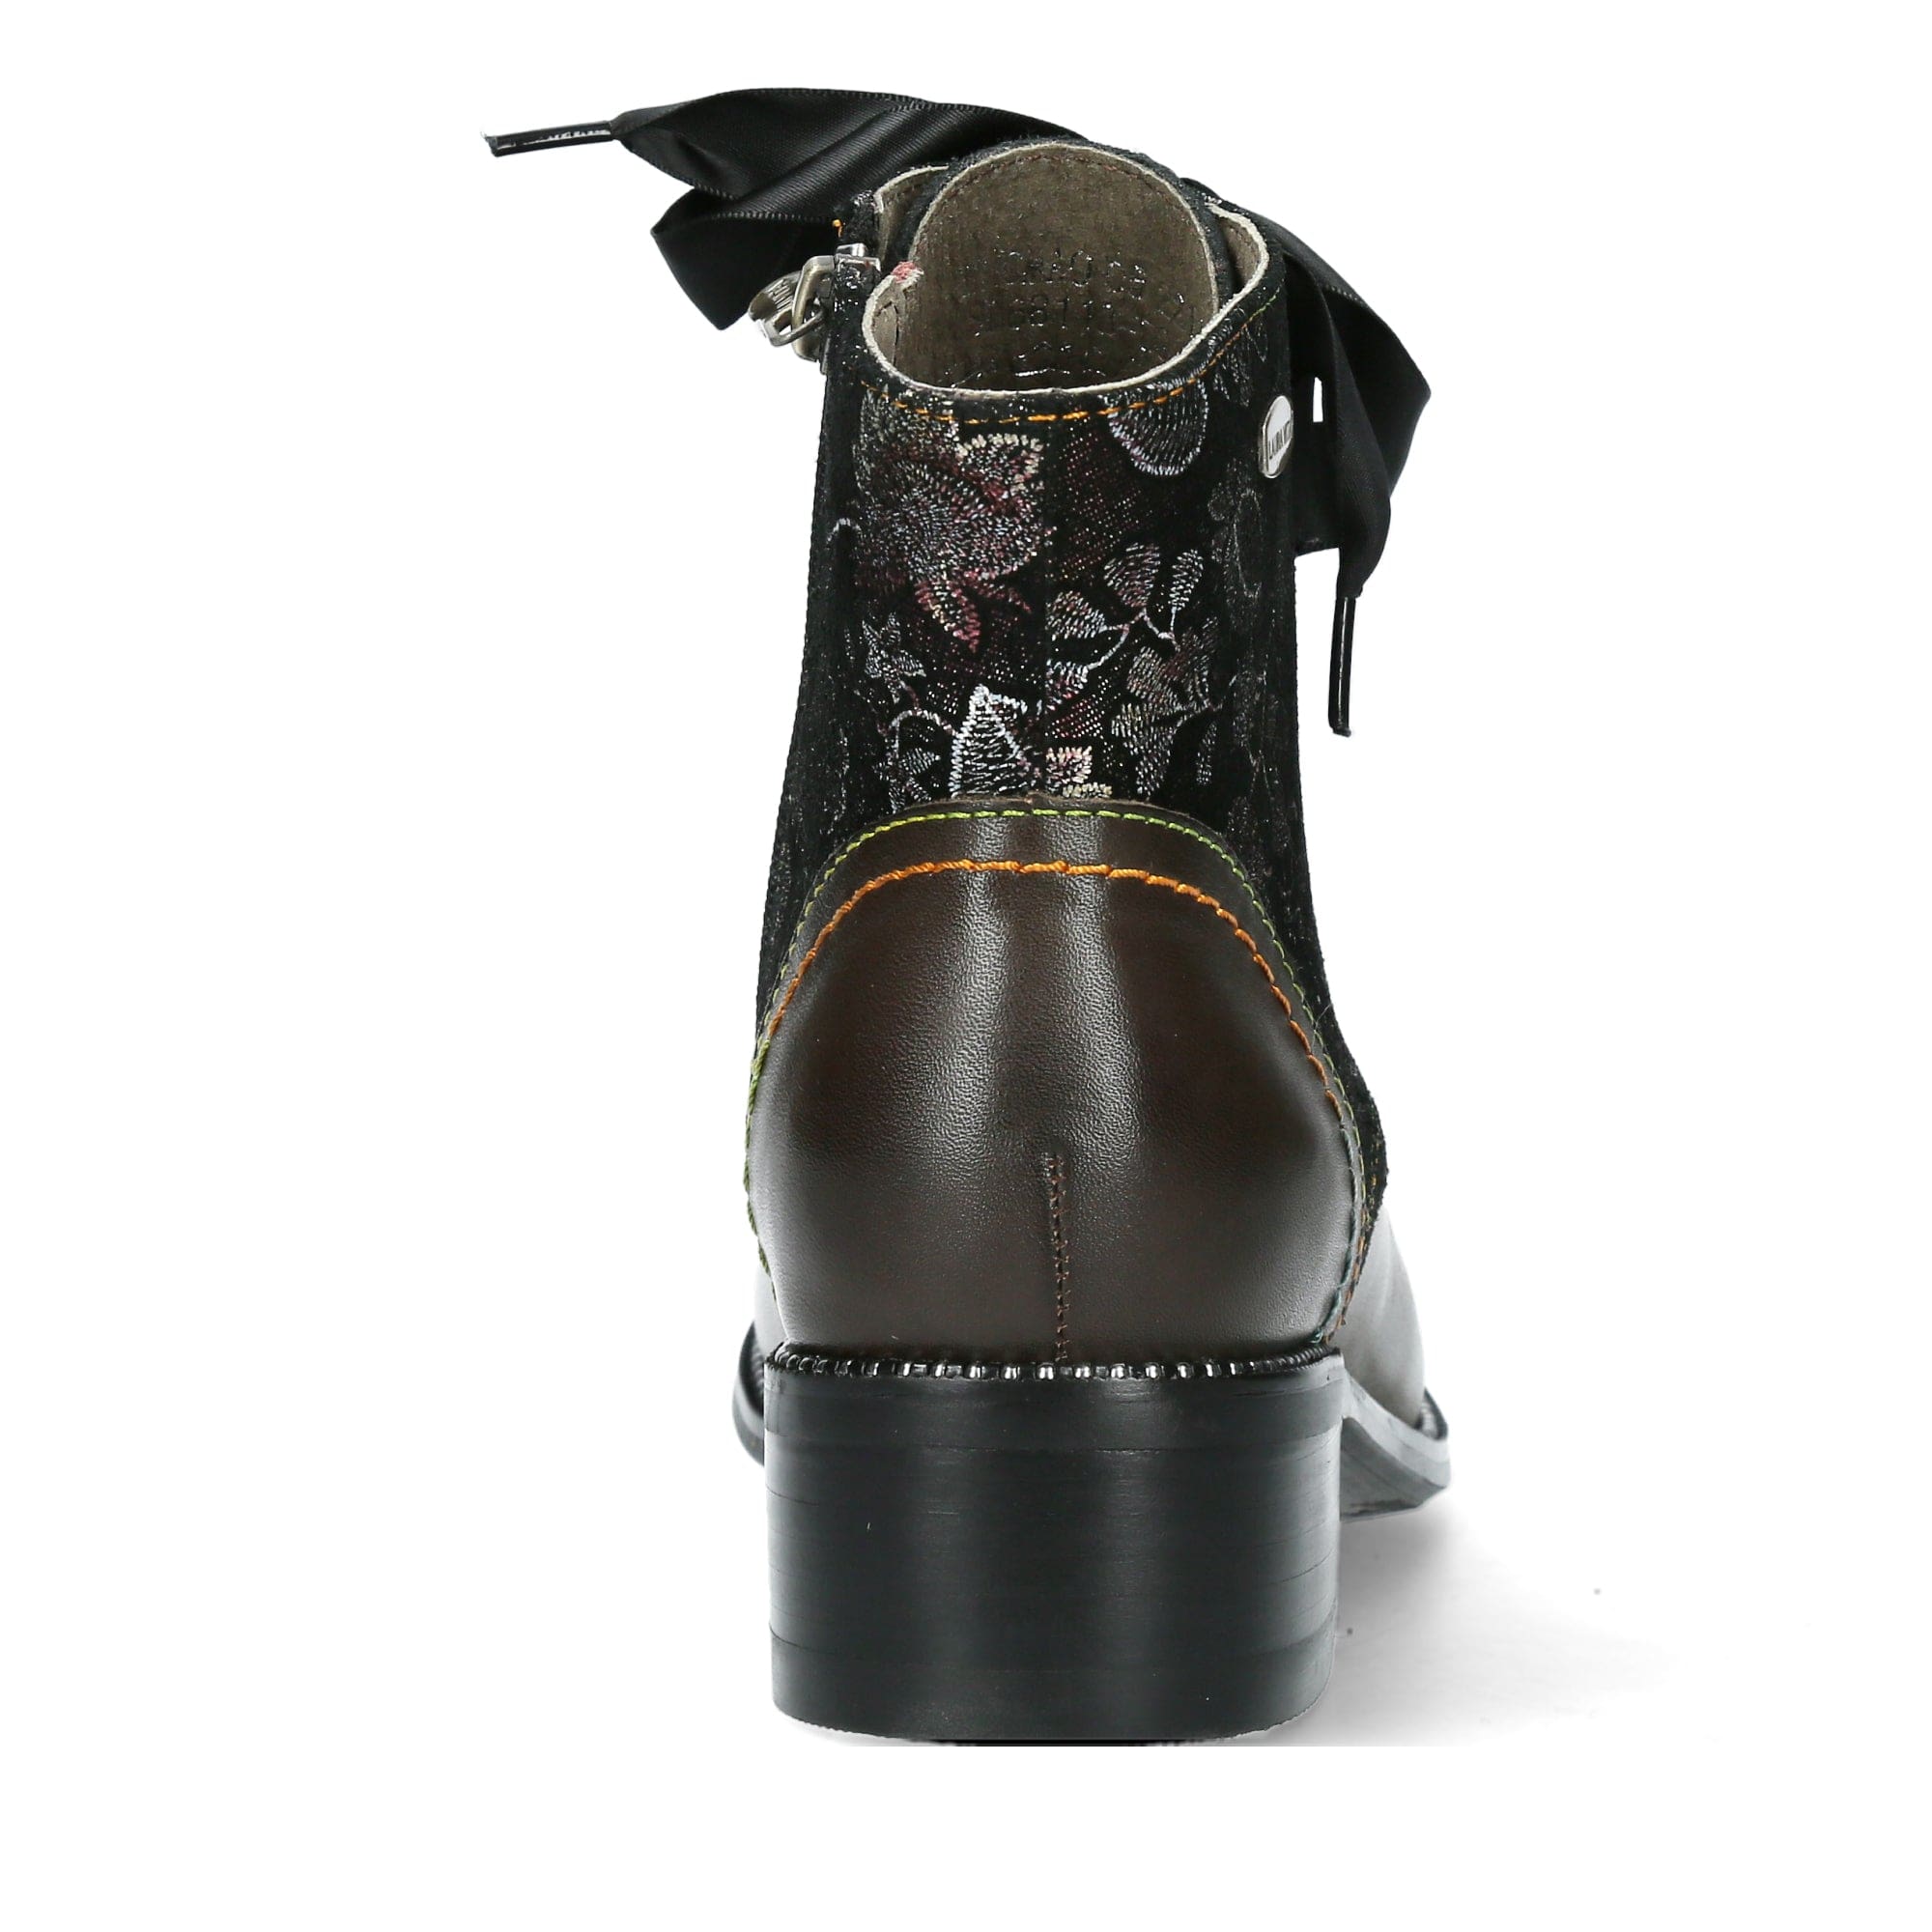 Chaussure EMCMAO 05 - Boots